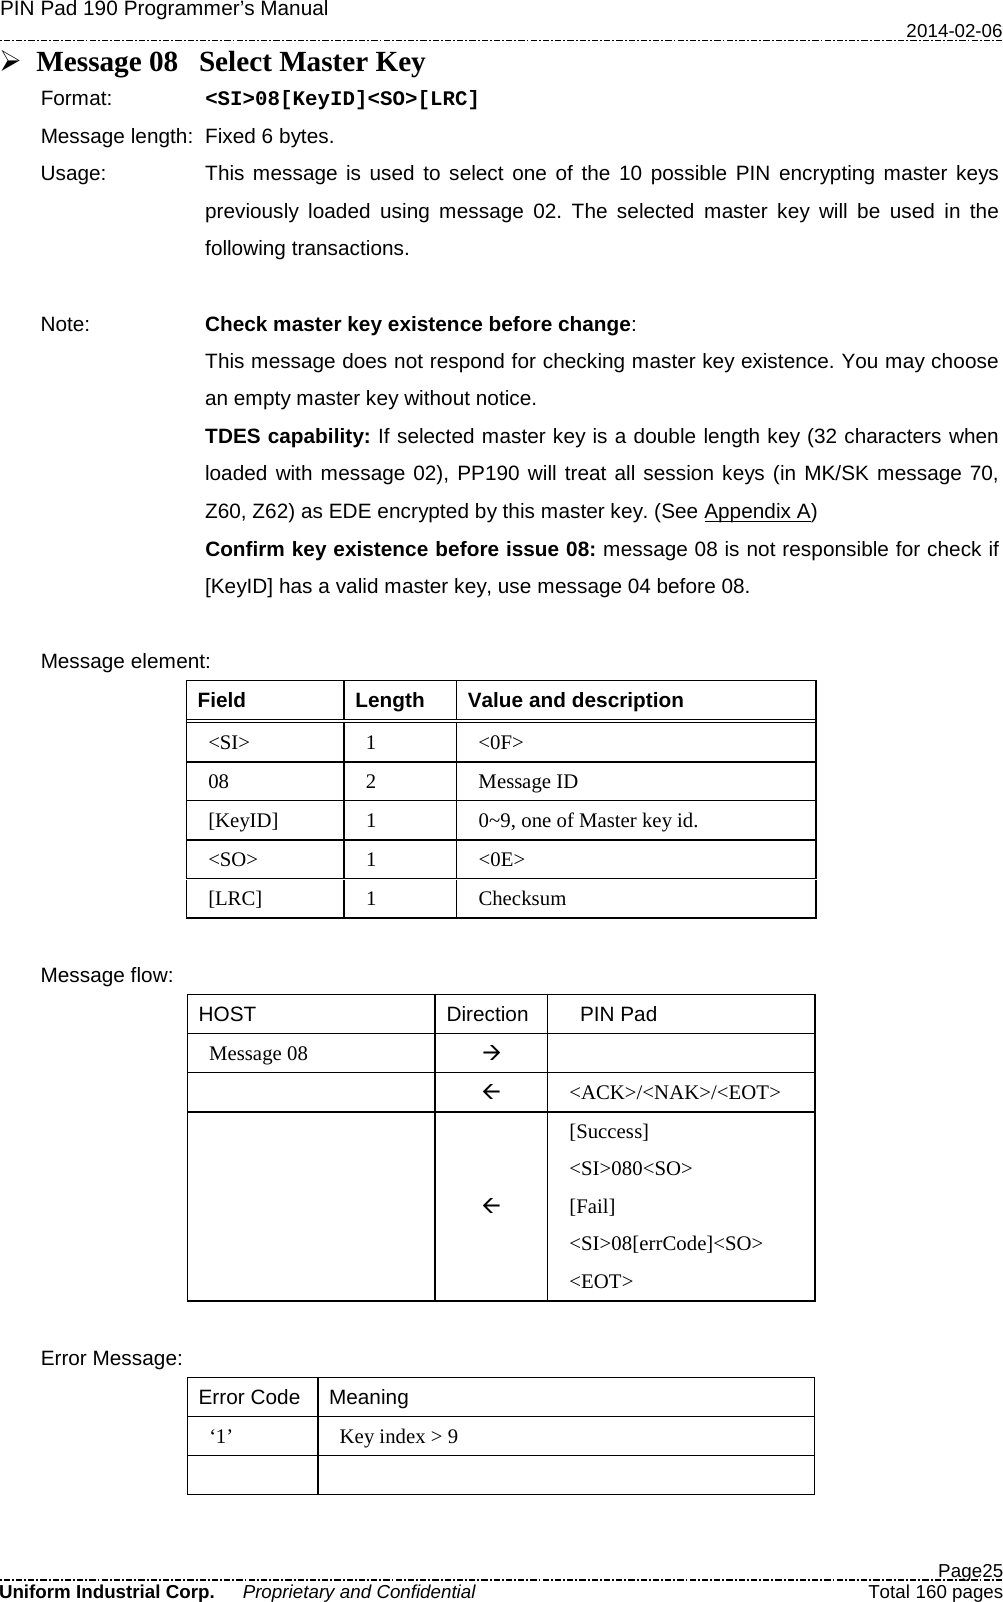 PIN Pad 190 Programmer’s Manual   2014-02-06  Page25 Uniform Industrial Corp. Proprietary and Confidential  Total 160 pages  Message 08 Select Master Key Format:   &lt;SI&gt;08[KeyID]&lt;SO&gt;[LRC] Message length: Fixed 6 bytes. Usage: This message is used to select one of the 10 possible PIN encrypting master keys previously loaded using message 02. The selected master key will be used in the following transactions.  Note: Check master key existence before change: This message does not respond for checking master key existence. You may choose an empty master key without notice.   TDES capability: If selected master key is a double length key (32 characters when loaded with message 02), PP190 will treat all session keys (in MK/SK message 70, Z60, Z62) as EDE encrypted by this master key. (See Appendix A)   Confirm key existence before issue 08: message 08 is not responsible for check if [KeyID] has a valid master key, use message 04 before 08.  Message element: Field  Length Value and description &lt;SI&gt;  1  &lt;0F&gt; 08  2  Message ID [KeyID]  1  0~9, one of Master key id. &lt;SO&gt;  1  &lt;0E&gt; [LRC]  1  Checksum  Message flow: HOST Direction   PIN Pad Message 08     &lt;ACK&gt;/&lt;NAK&gt;/&lt;EOT&gt;   [Success] &lt;SI&gt;080&lt;SO&gt; [Fail] &lt;SI&gt;08[errCode]&lt;SO&gt; &lt;EOT&gt;  Error Message: Error Code Meaning ‘1’  Key index &gt; 9    